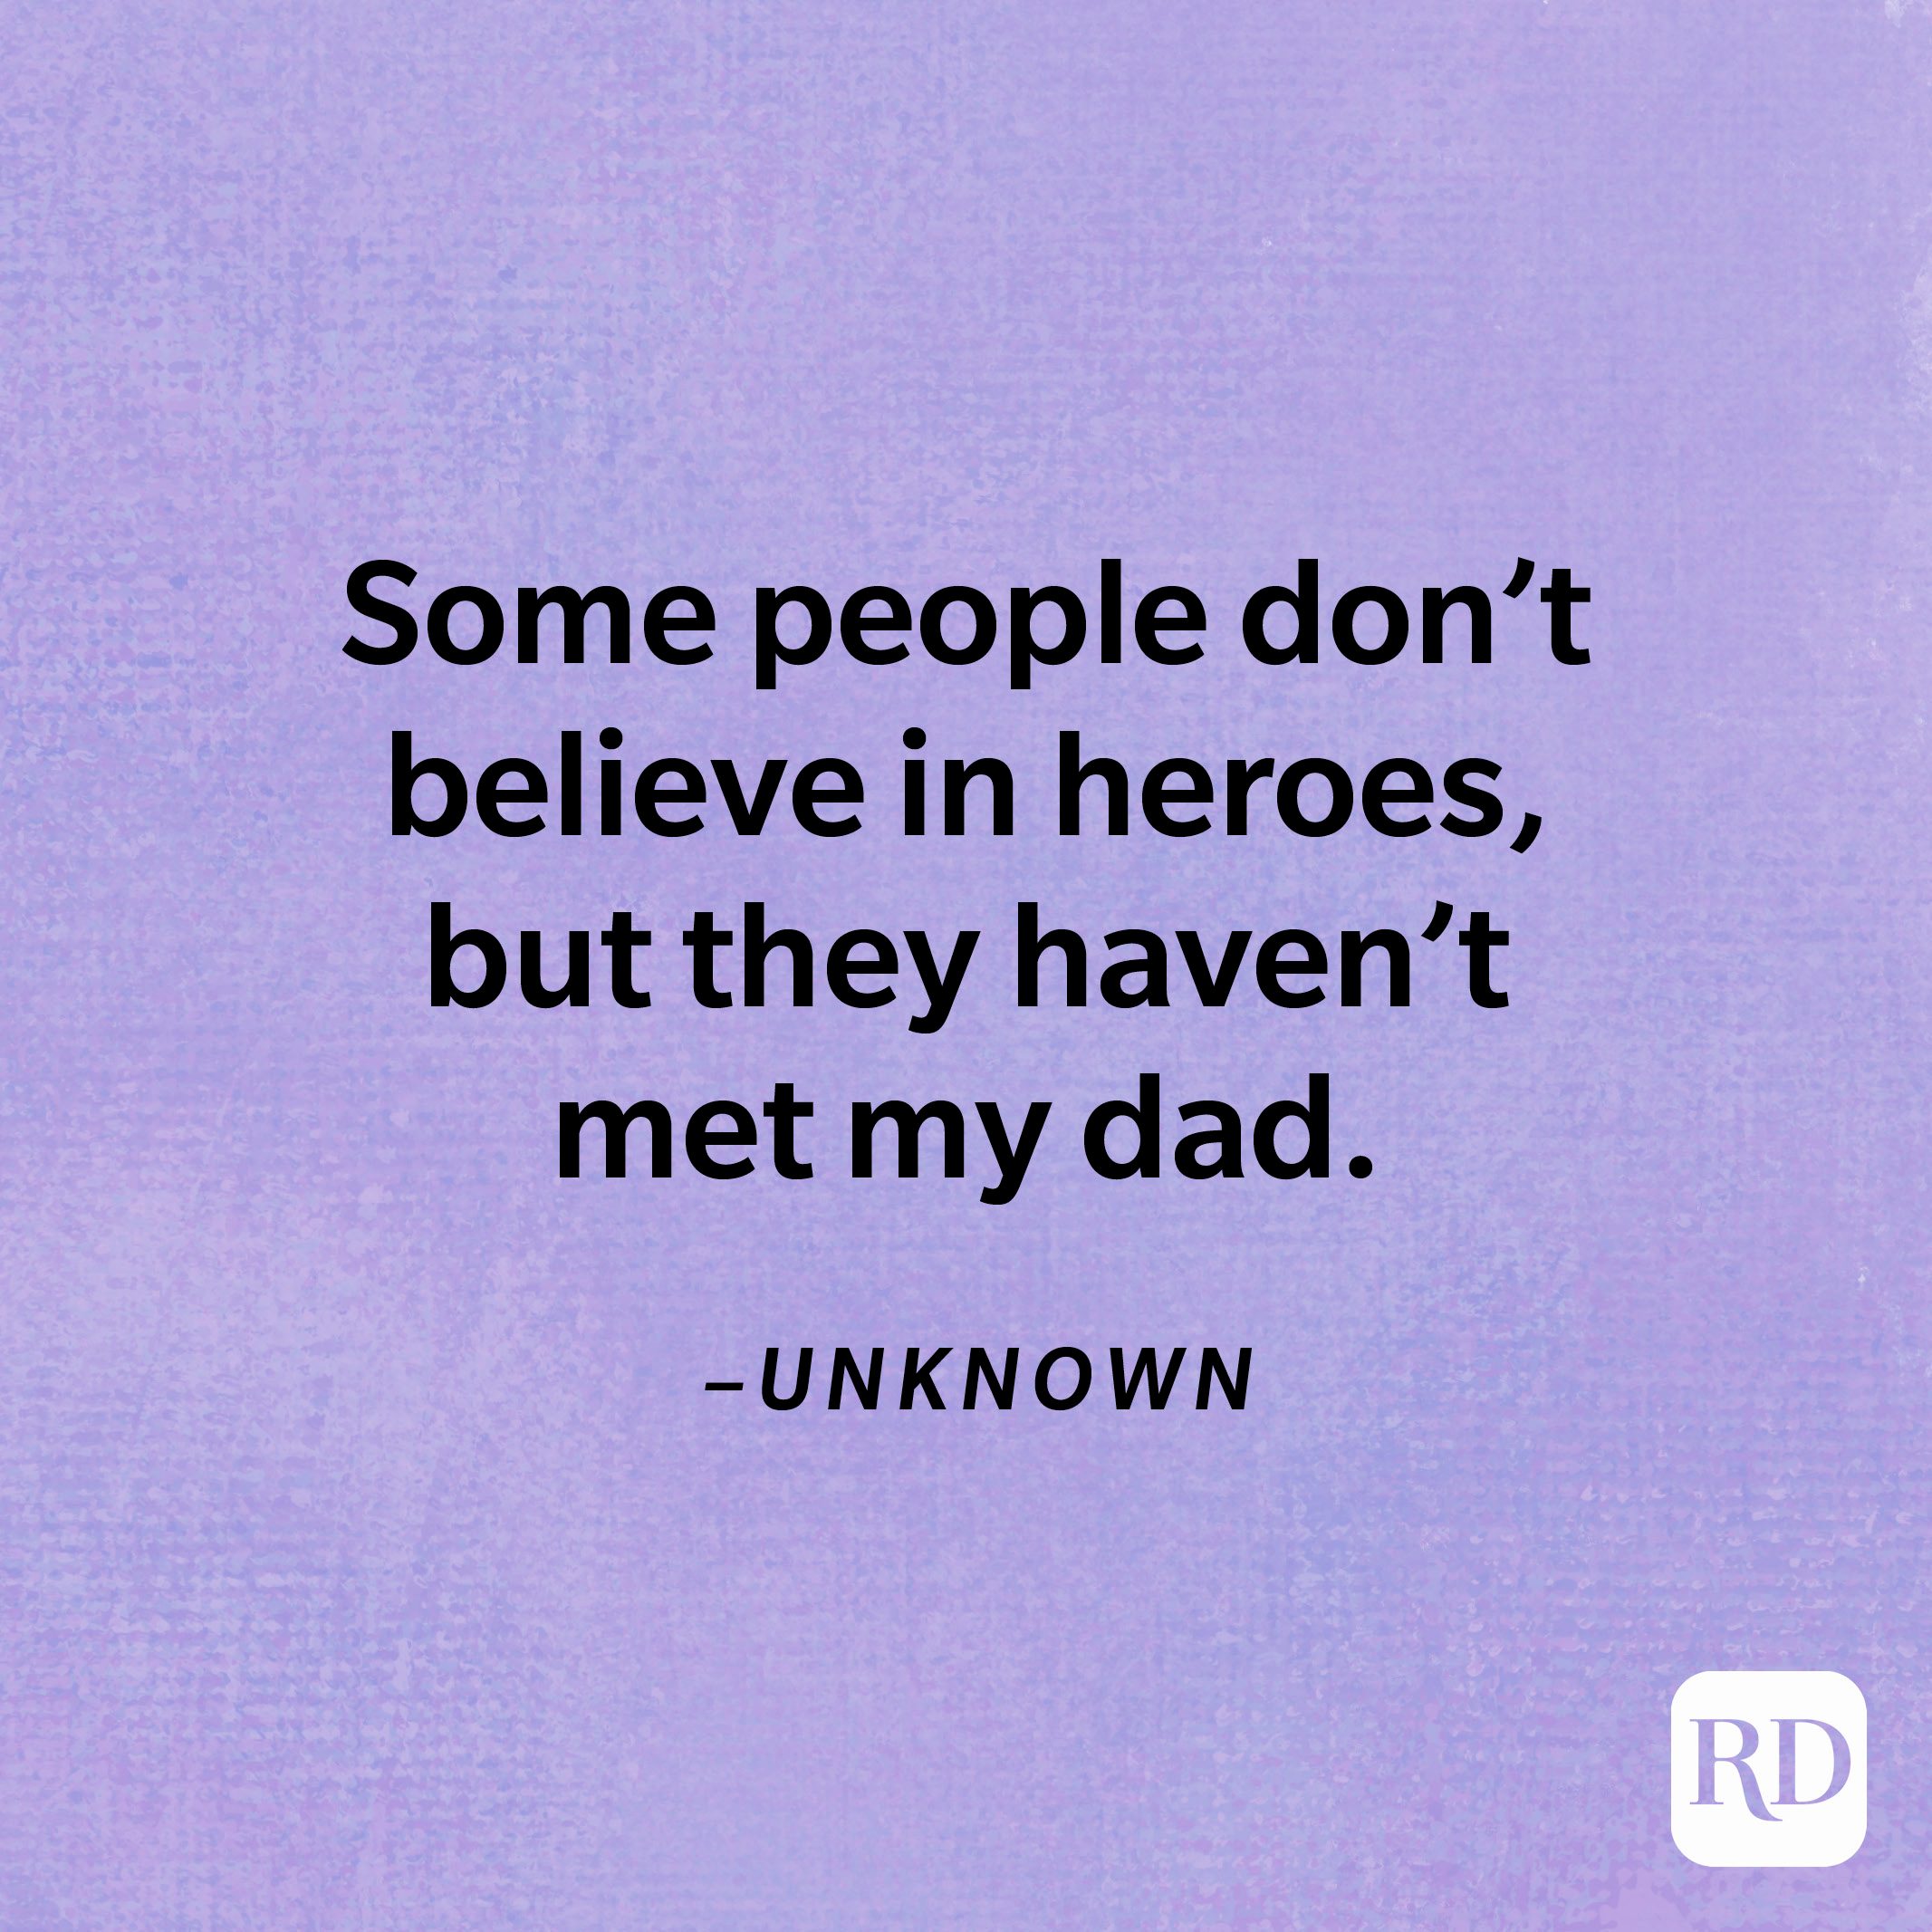 "Some people don't believe in heroes, but they haven't met my dad."—Unknown